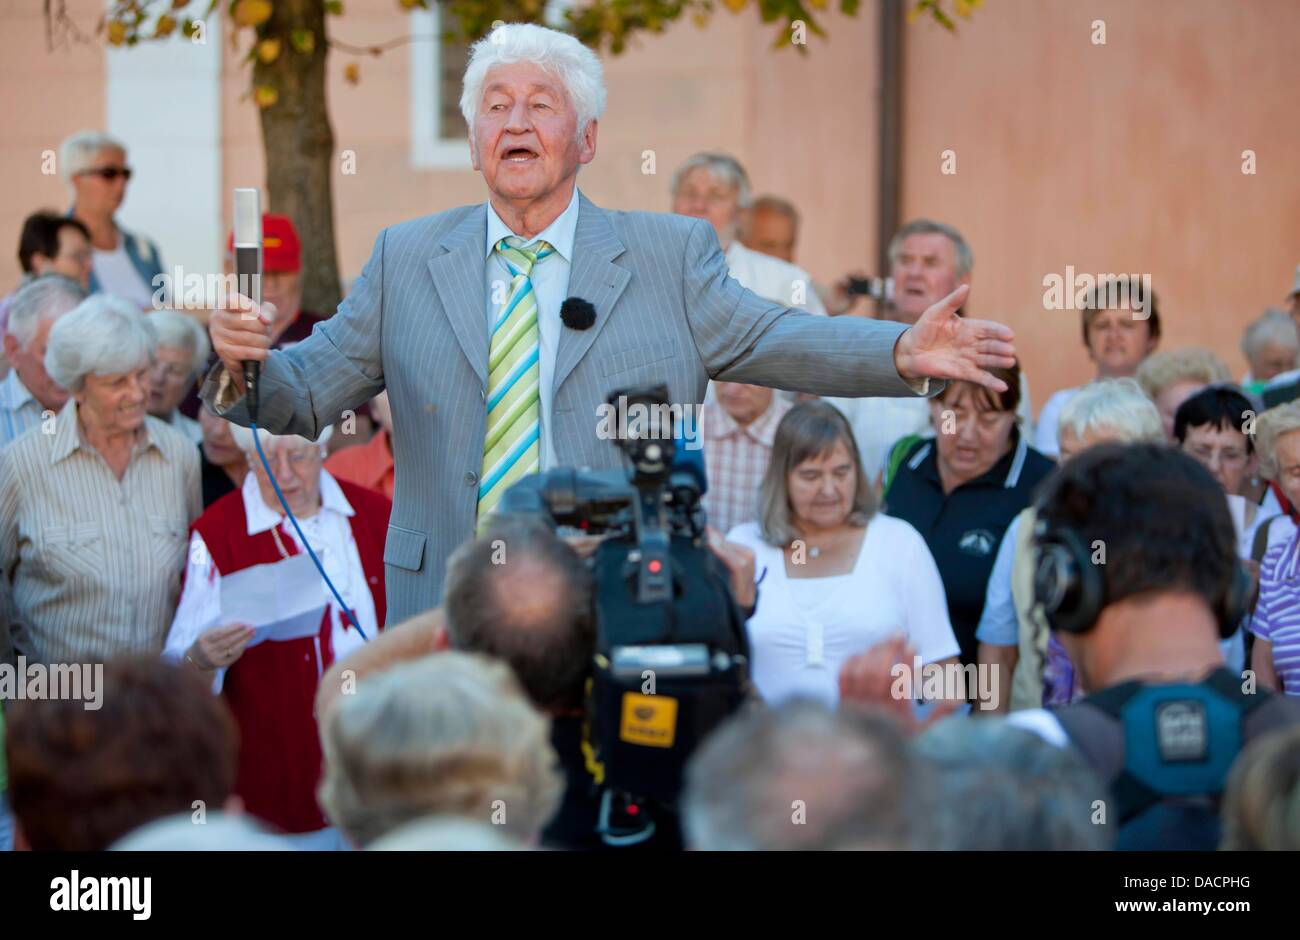 Choir leader Gotthilf Fischer (C) stands surrounded by a crowd singing folk songs on the market square in Eisenach, Germany, 30 September 2011. The event marks the prelude to the televised live event 'Die schoensten deutschen Volkslieder' (The most beautiful German folk songs) of German broadcasting station MDR, which nominates the most favourite song. Photo: Michael Reichel Stock Photo